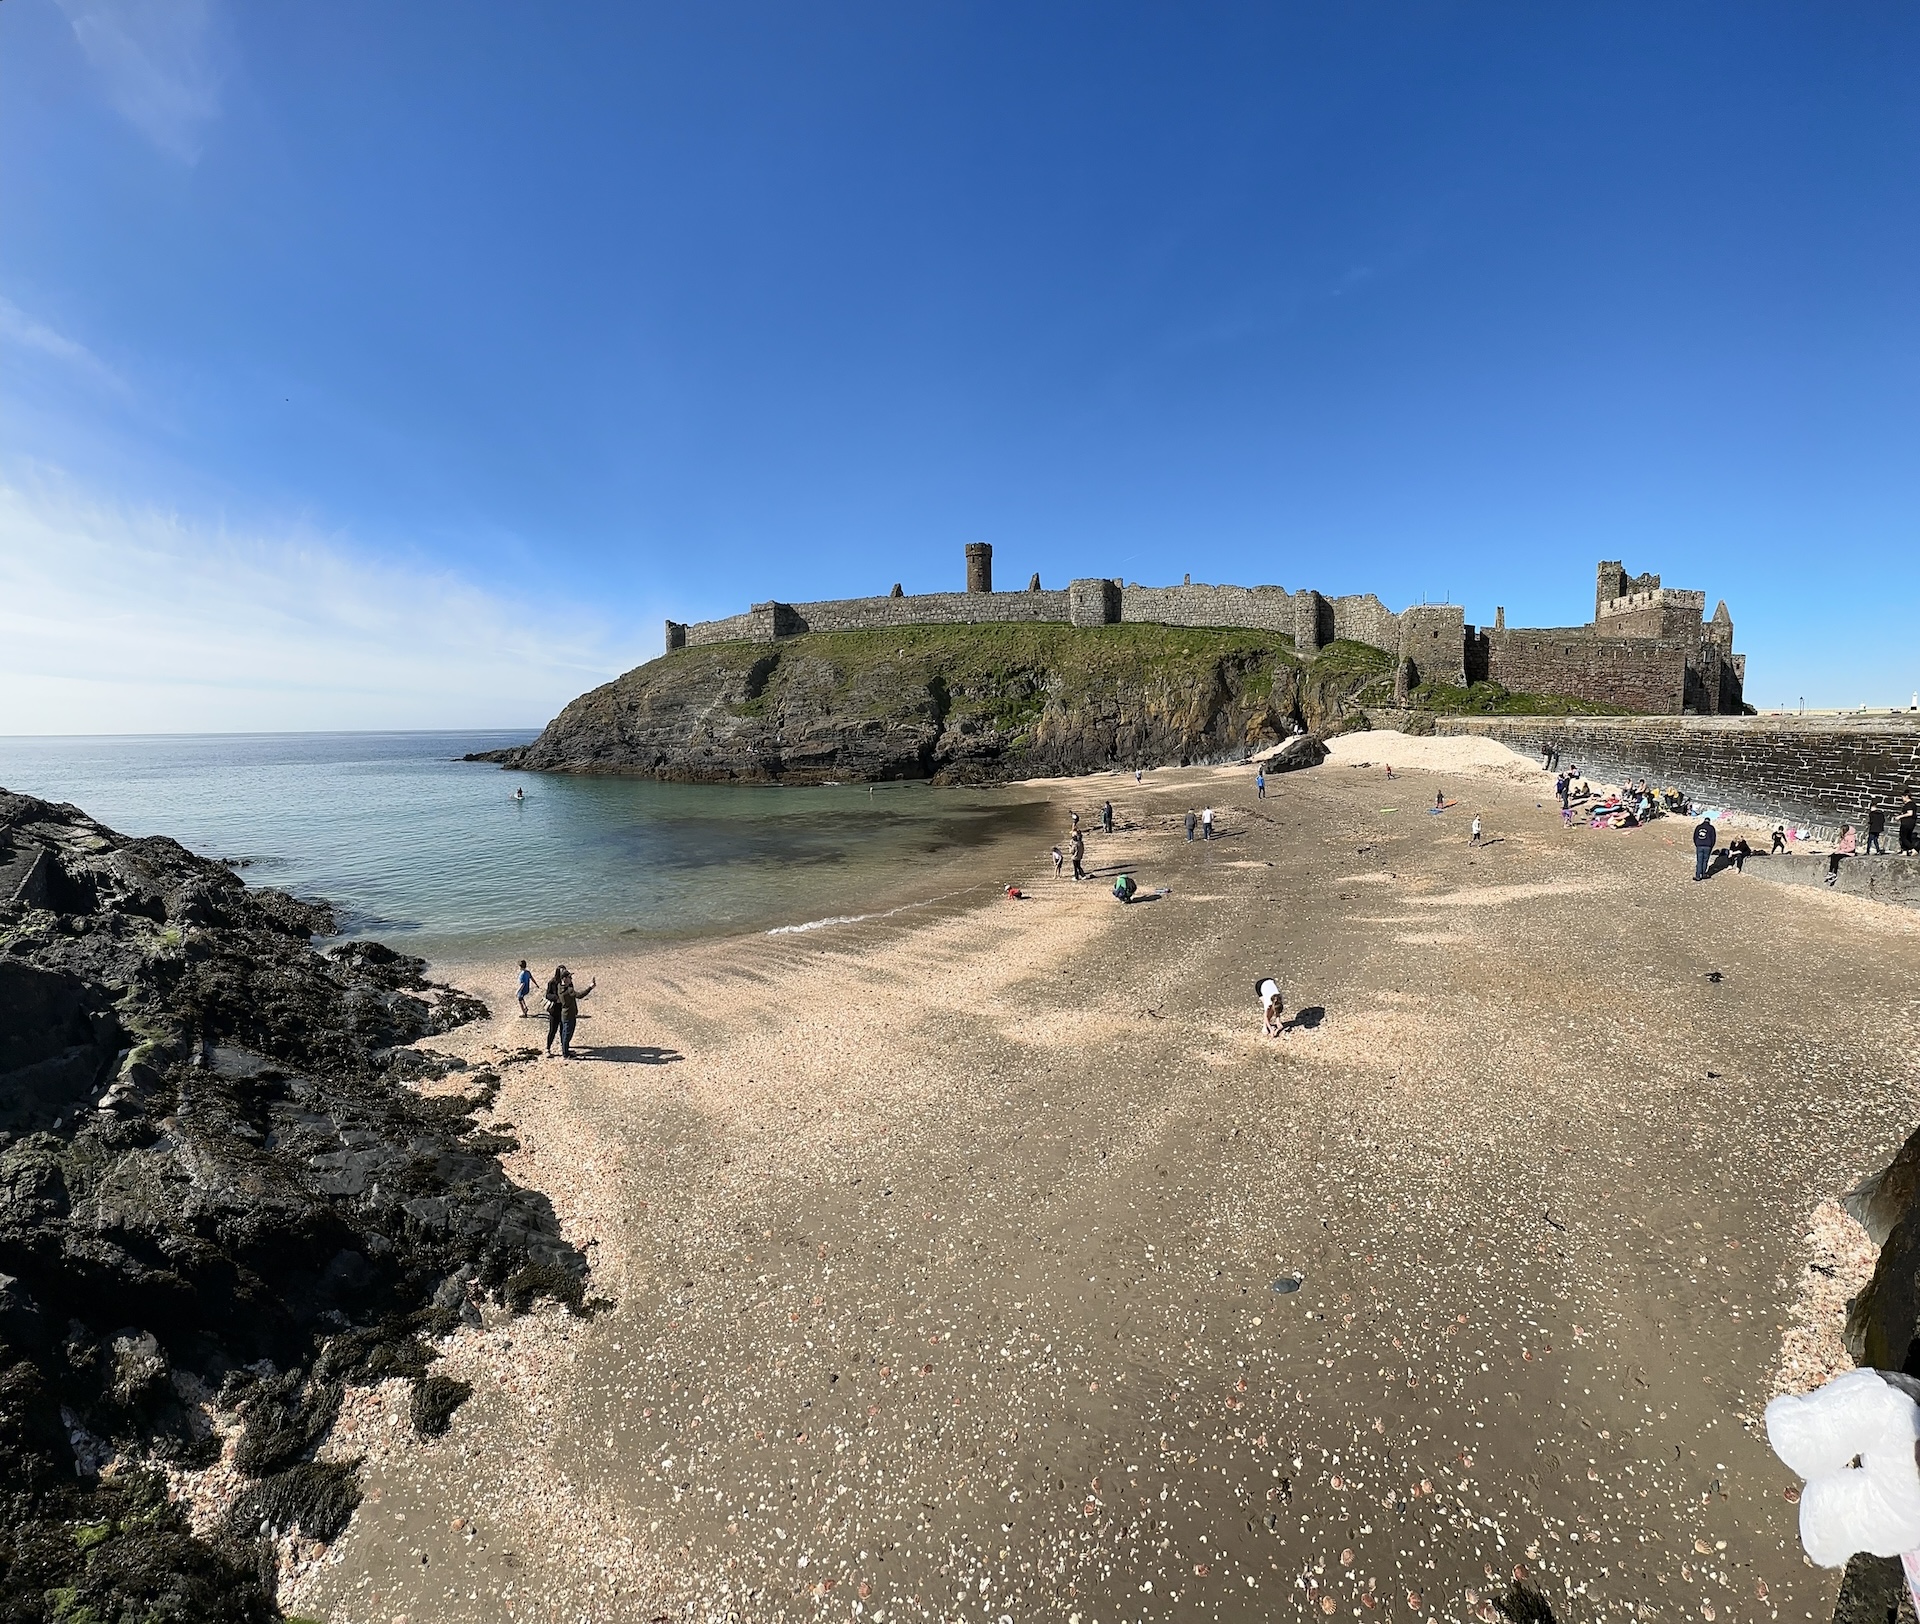 Peel Castle, Fenella Beach during a beautiful sunny day